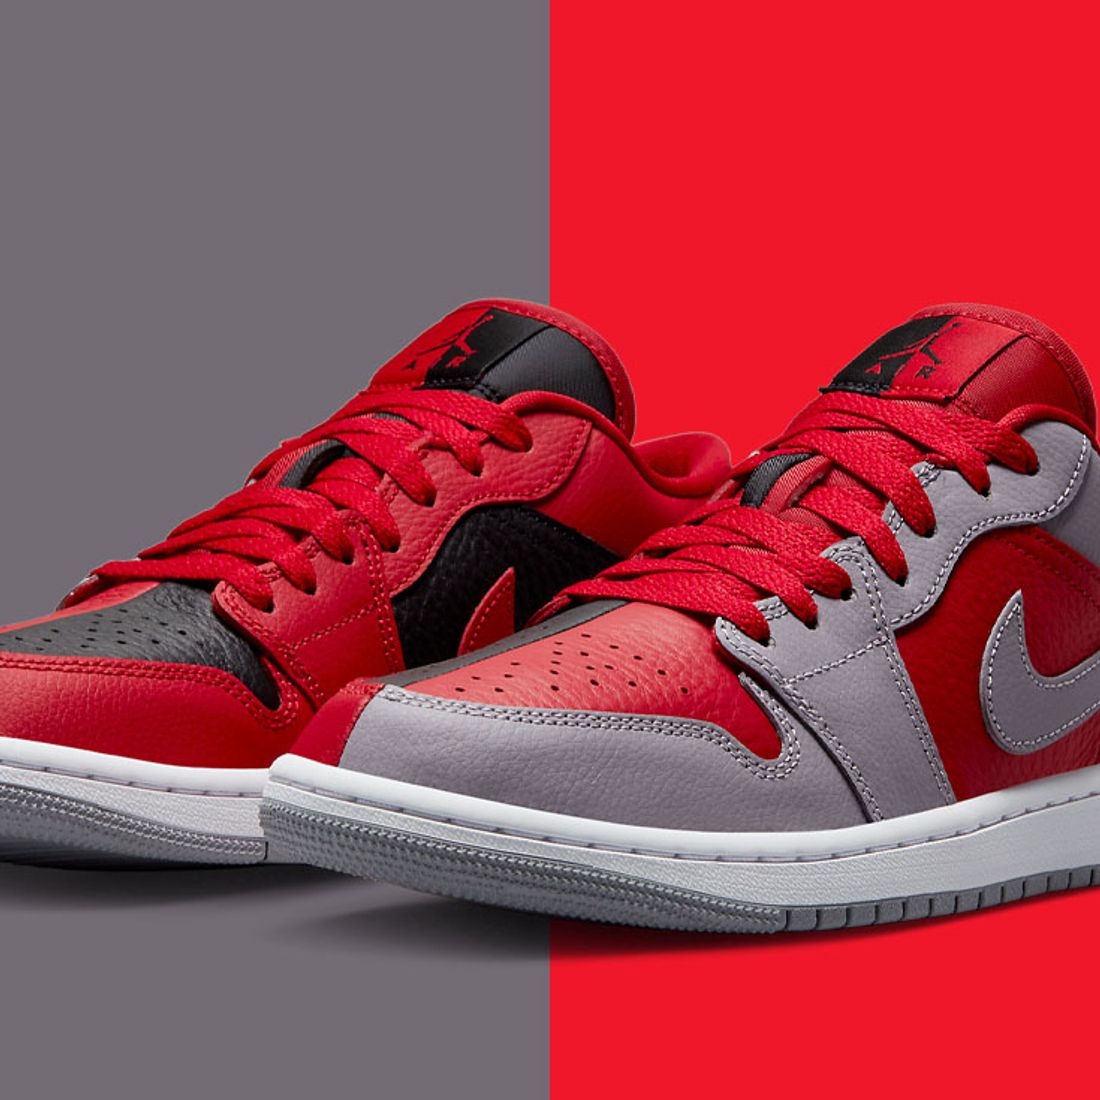 Sneaker Freaker on X: Here's how to style the Air Jordan 1